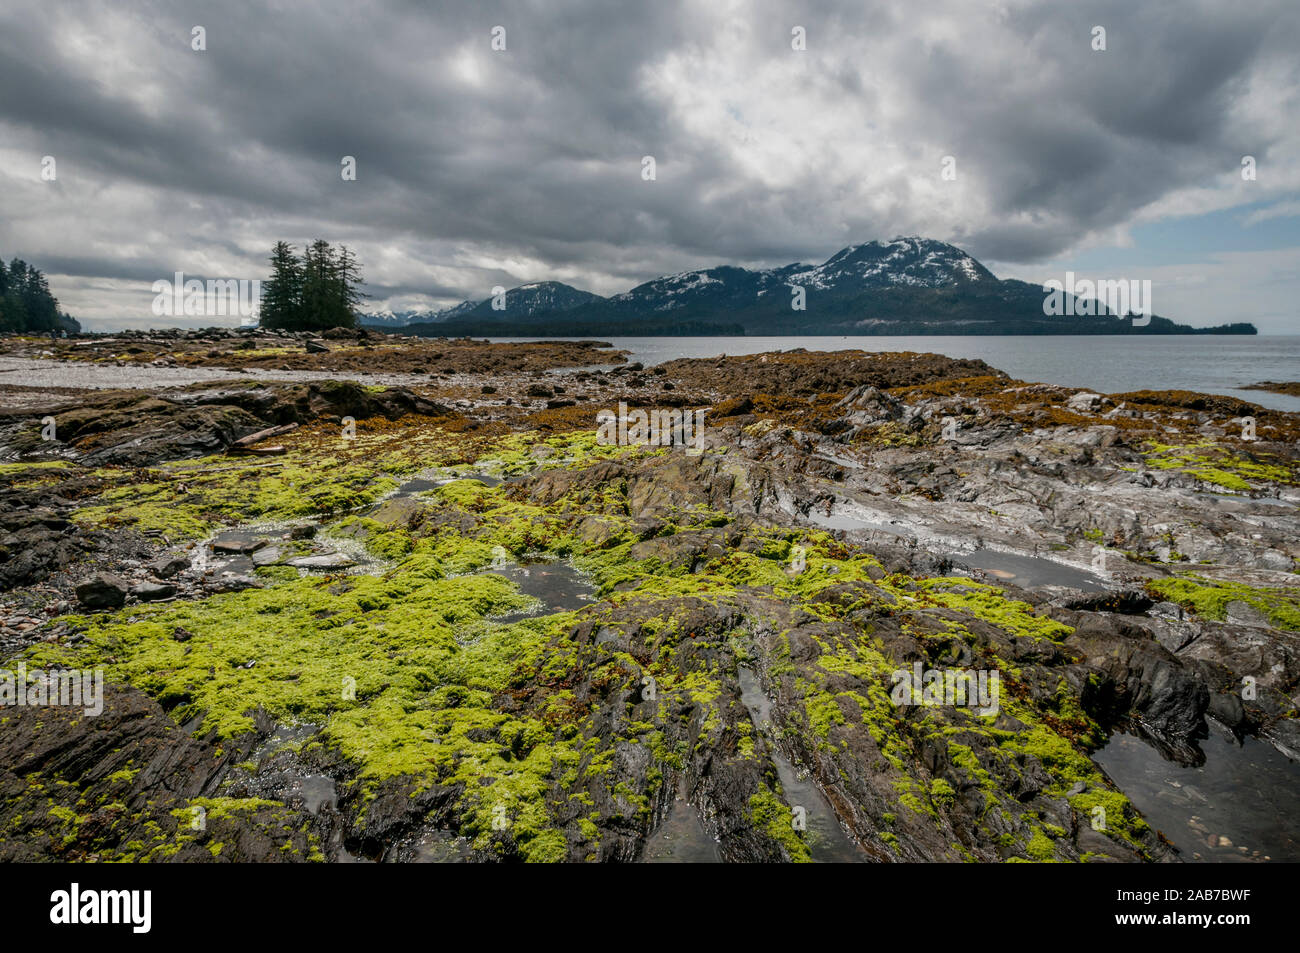 Landscape showing intertidal zone of Rotary Beach, Revillagigedo Channel and Annette Island (on horizon), Ketchikan, Alaska, USA. Stock Photo